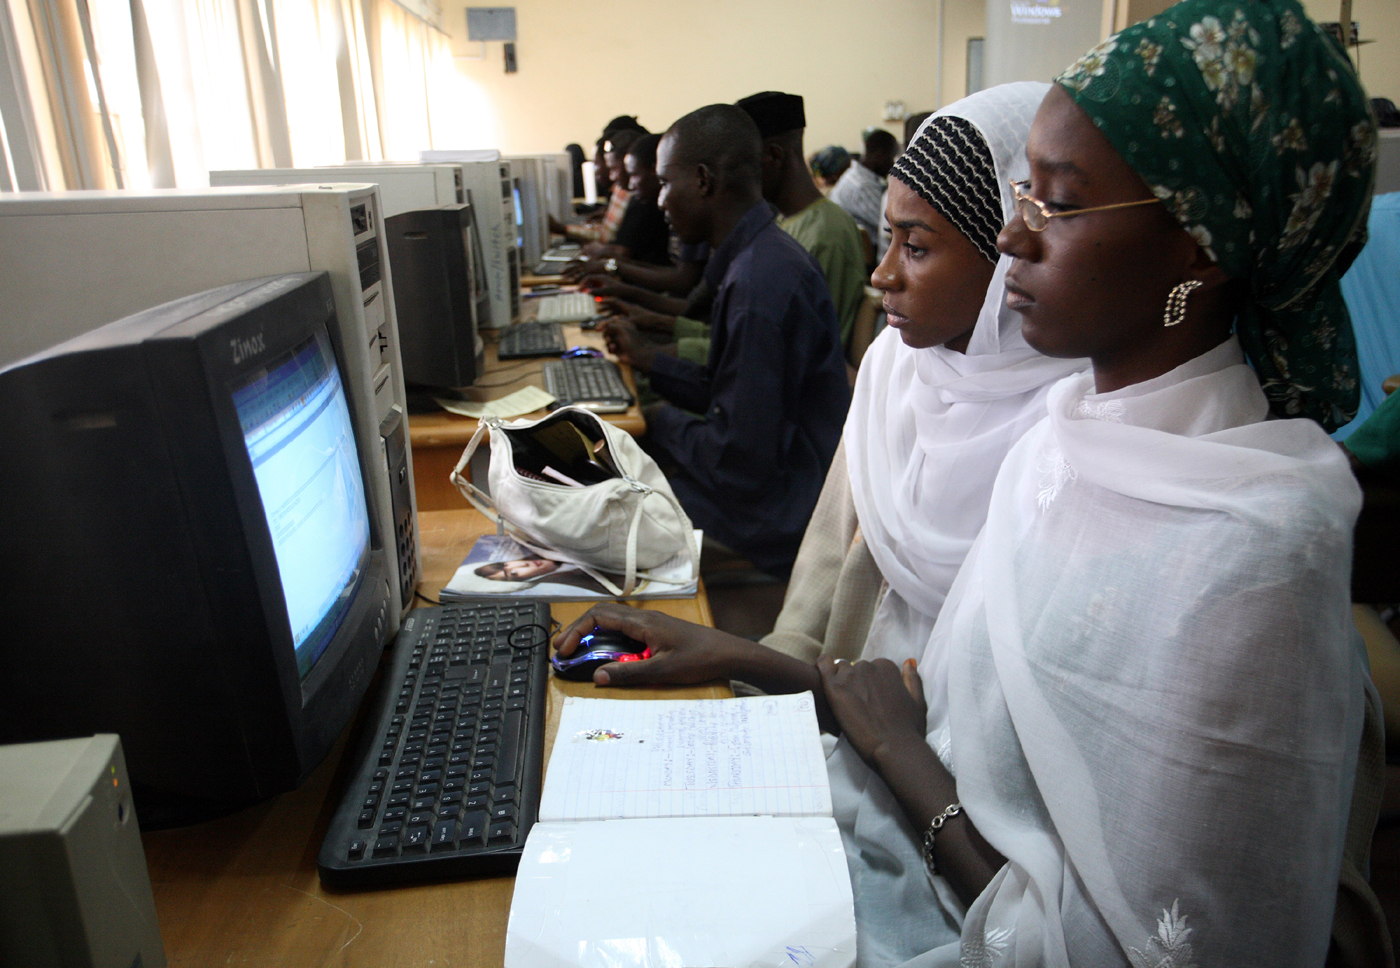 Students working on computers in a university computer lab, including a woman in a green hijab actively using a mouse.